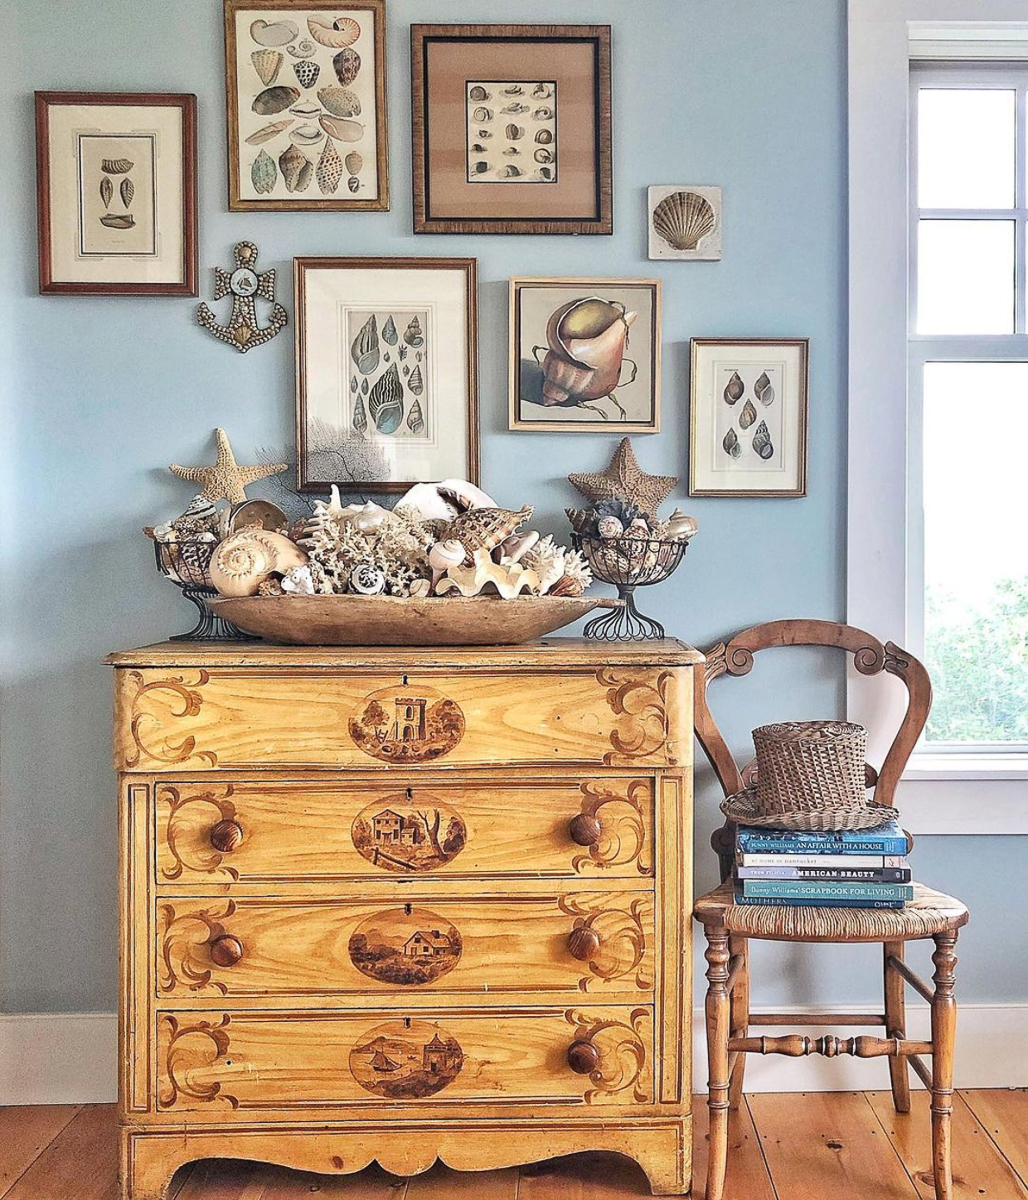 Antique shell art and a huge dough bowl filled with shells and coral in this coastal home kellyelko.com